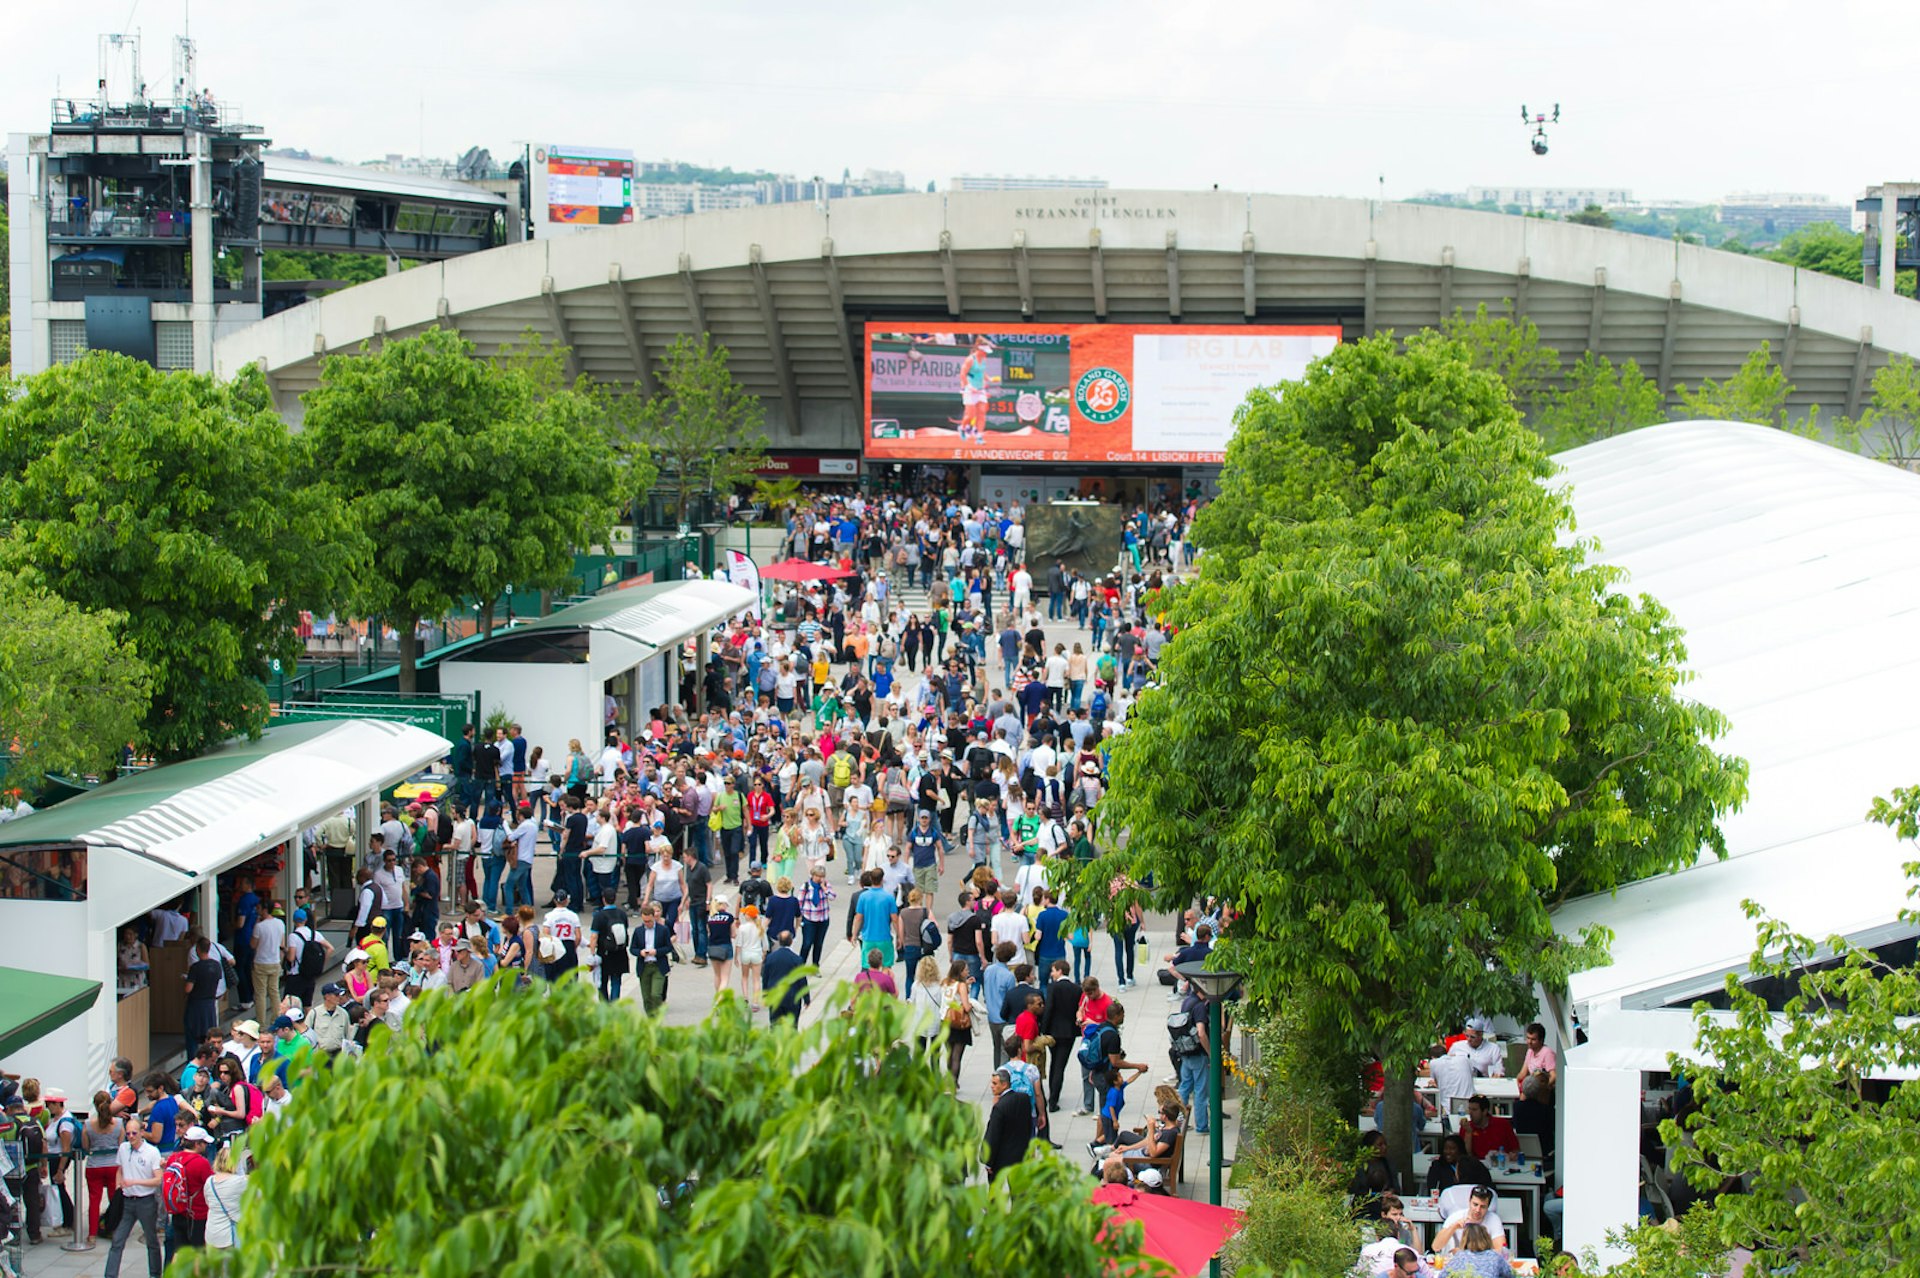 Crowds in colourful attire walk to and fro along a wide boulevard leading up to Court Suzanne Lenglen; on either side of the pedestrian path are temporary stalls beneath large green trees selling drinks, food and tennis paraphernalia